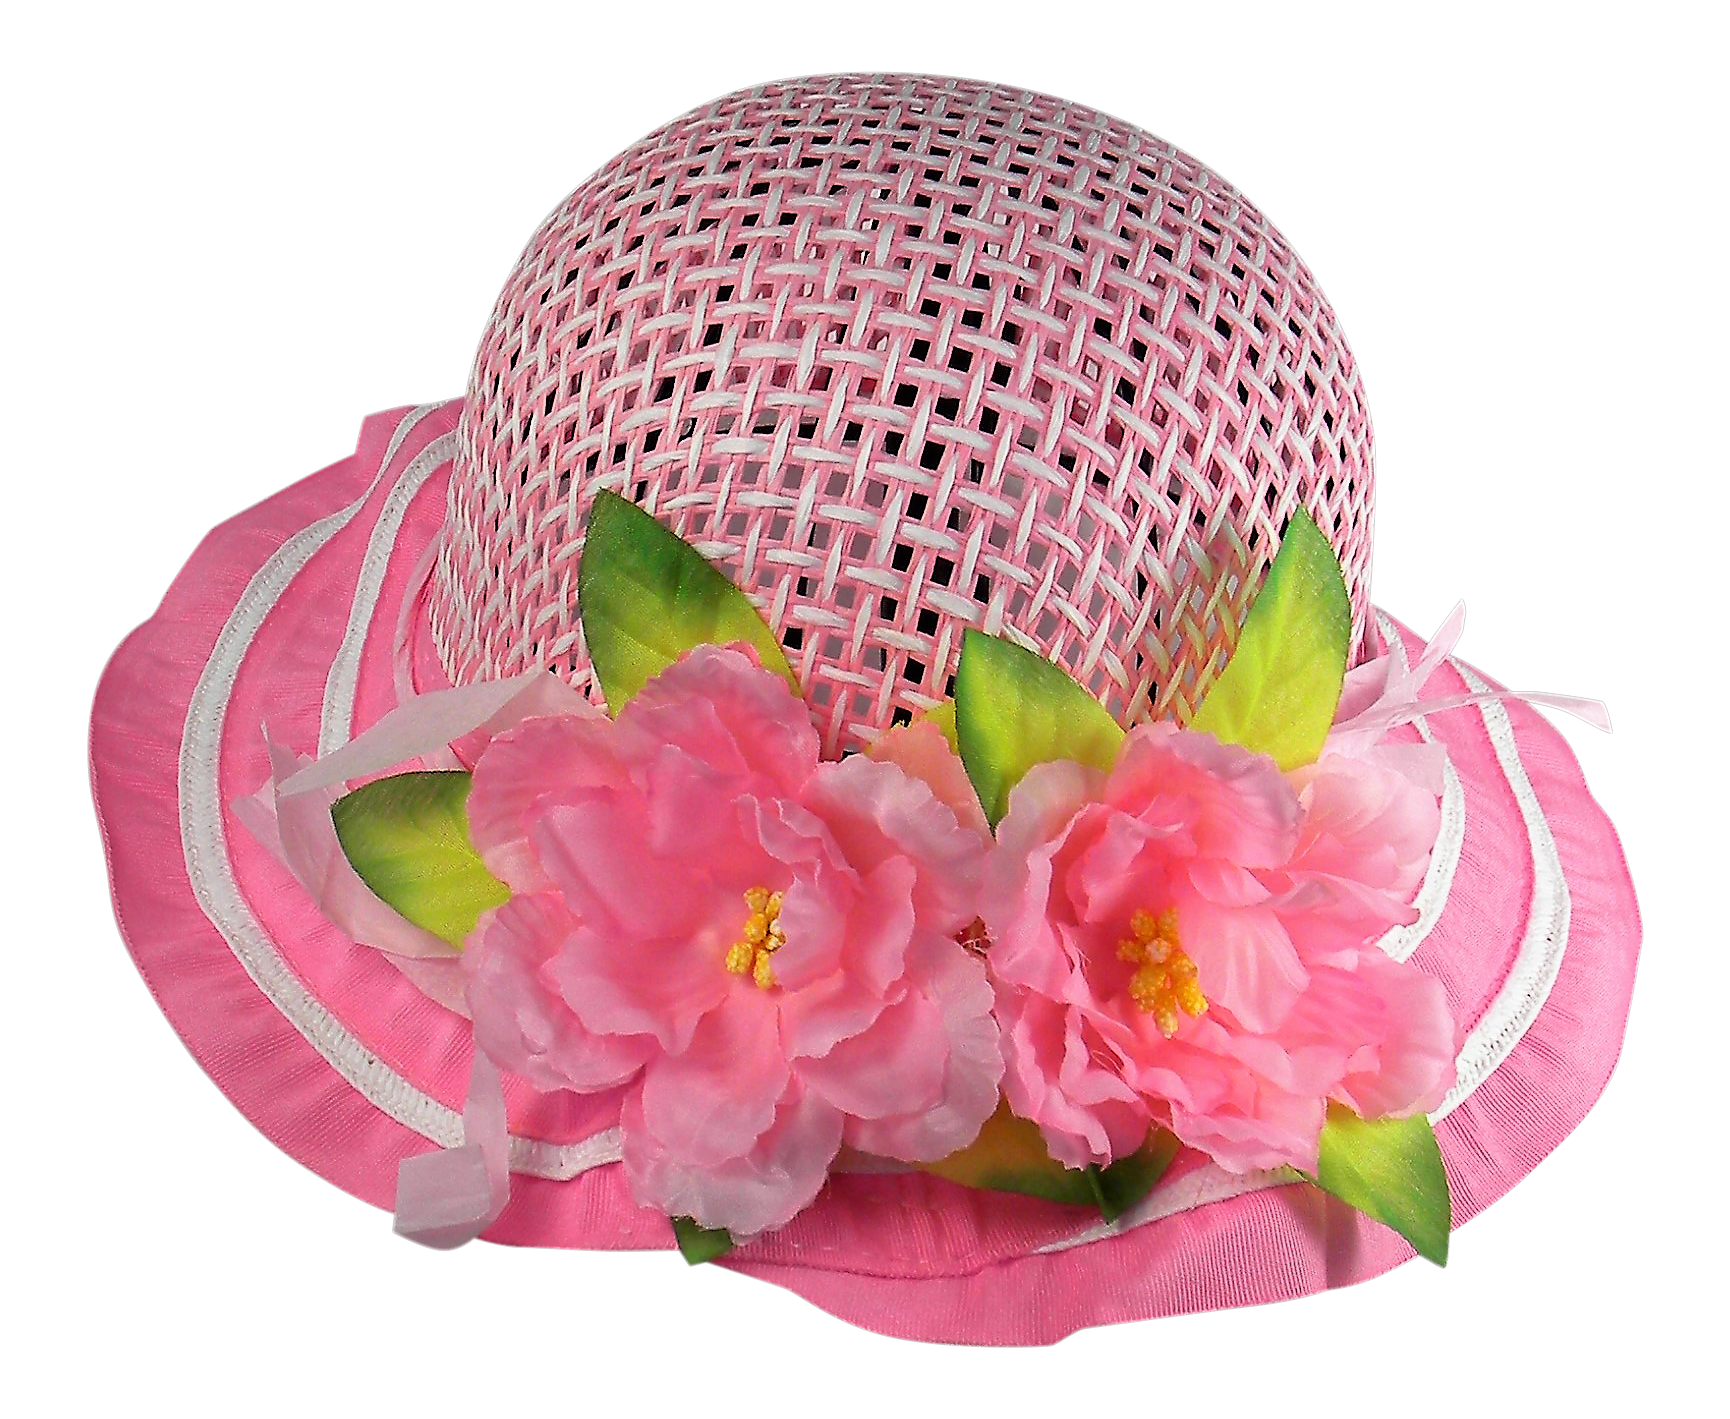 Girls Tea Party Dress Up Hat With Pink Boa Parasol And White Gloves